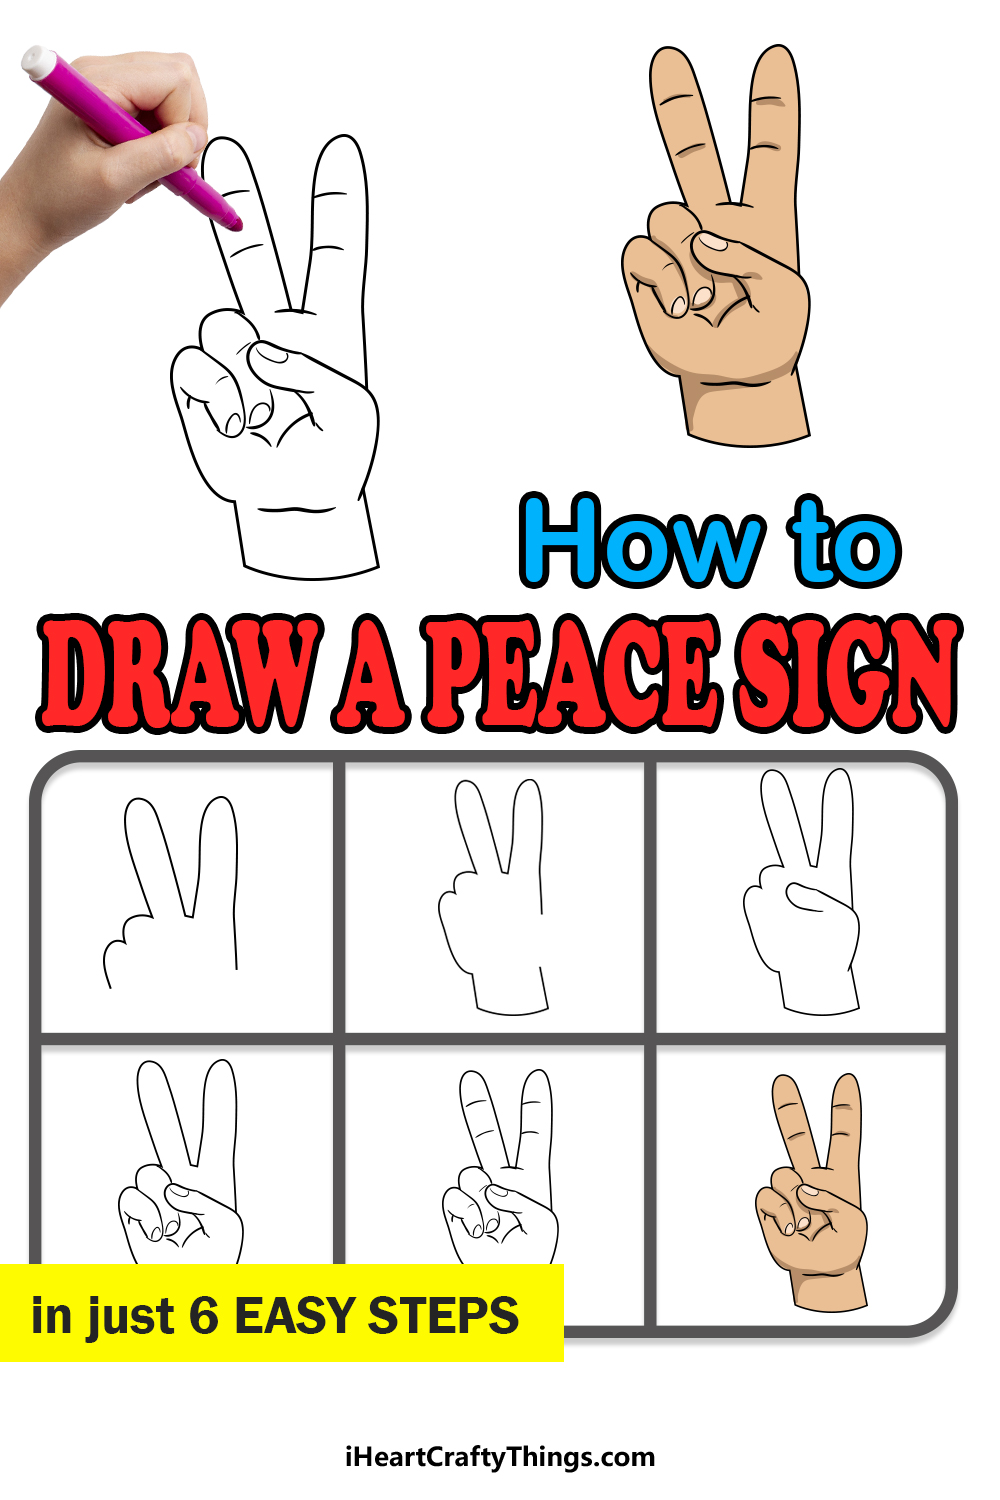 how to draw a peace sign in 6 easy steps